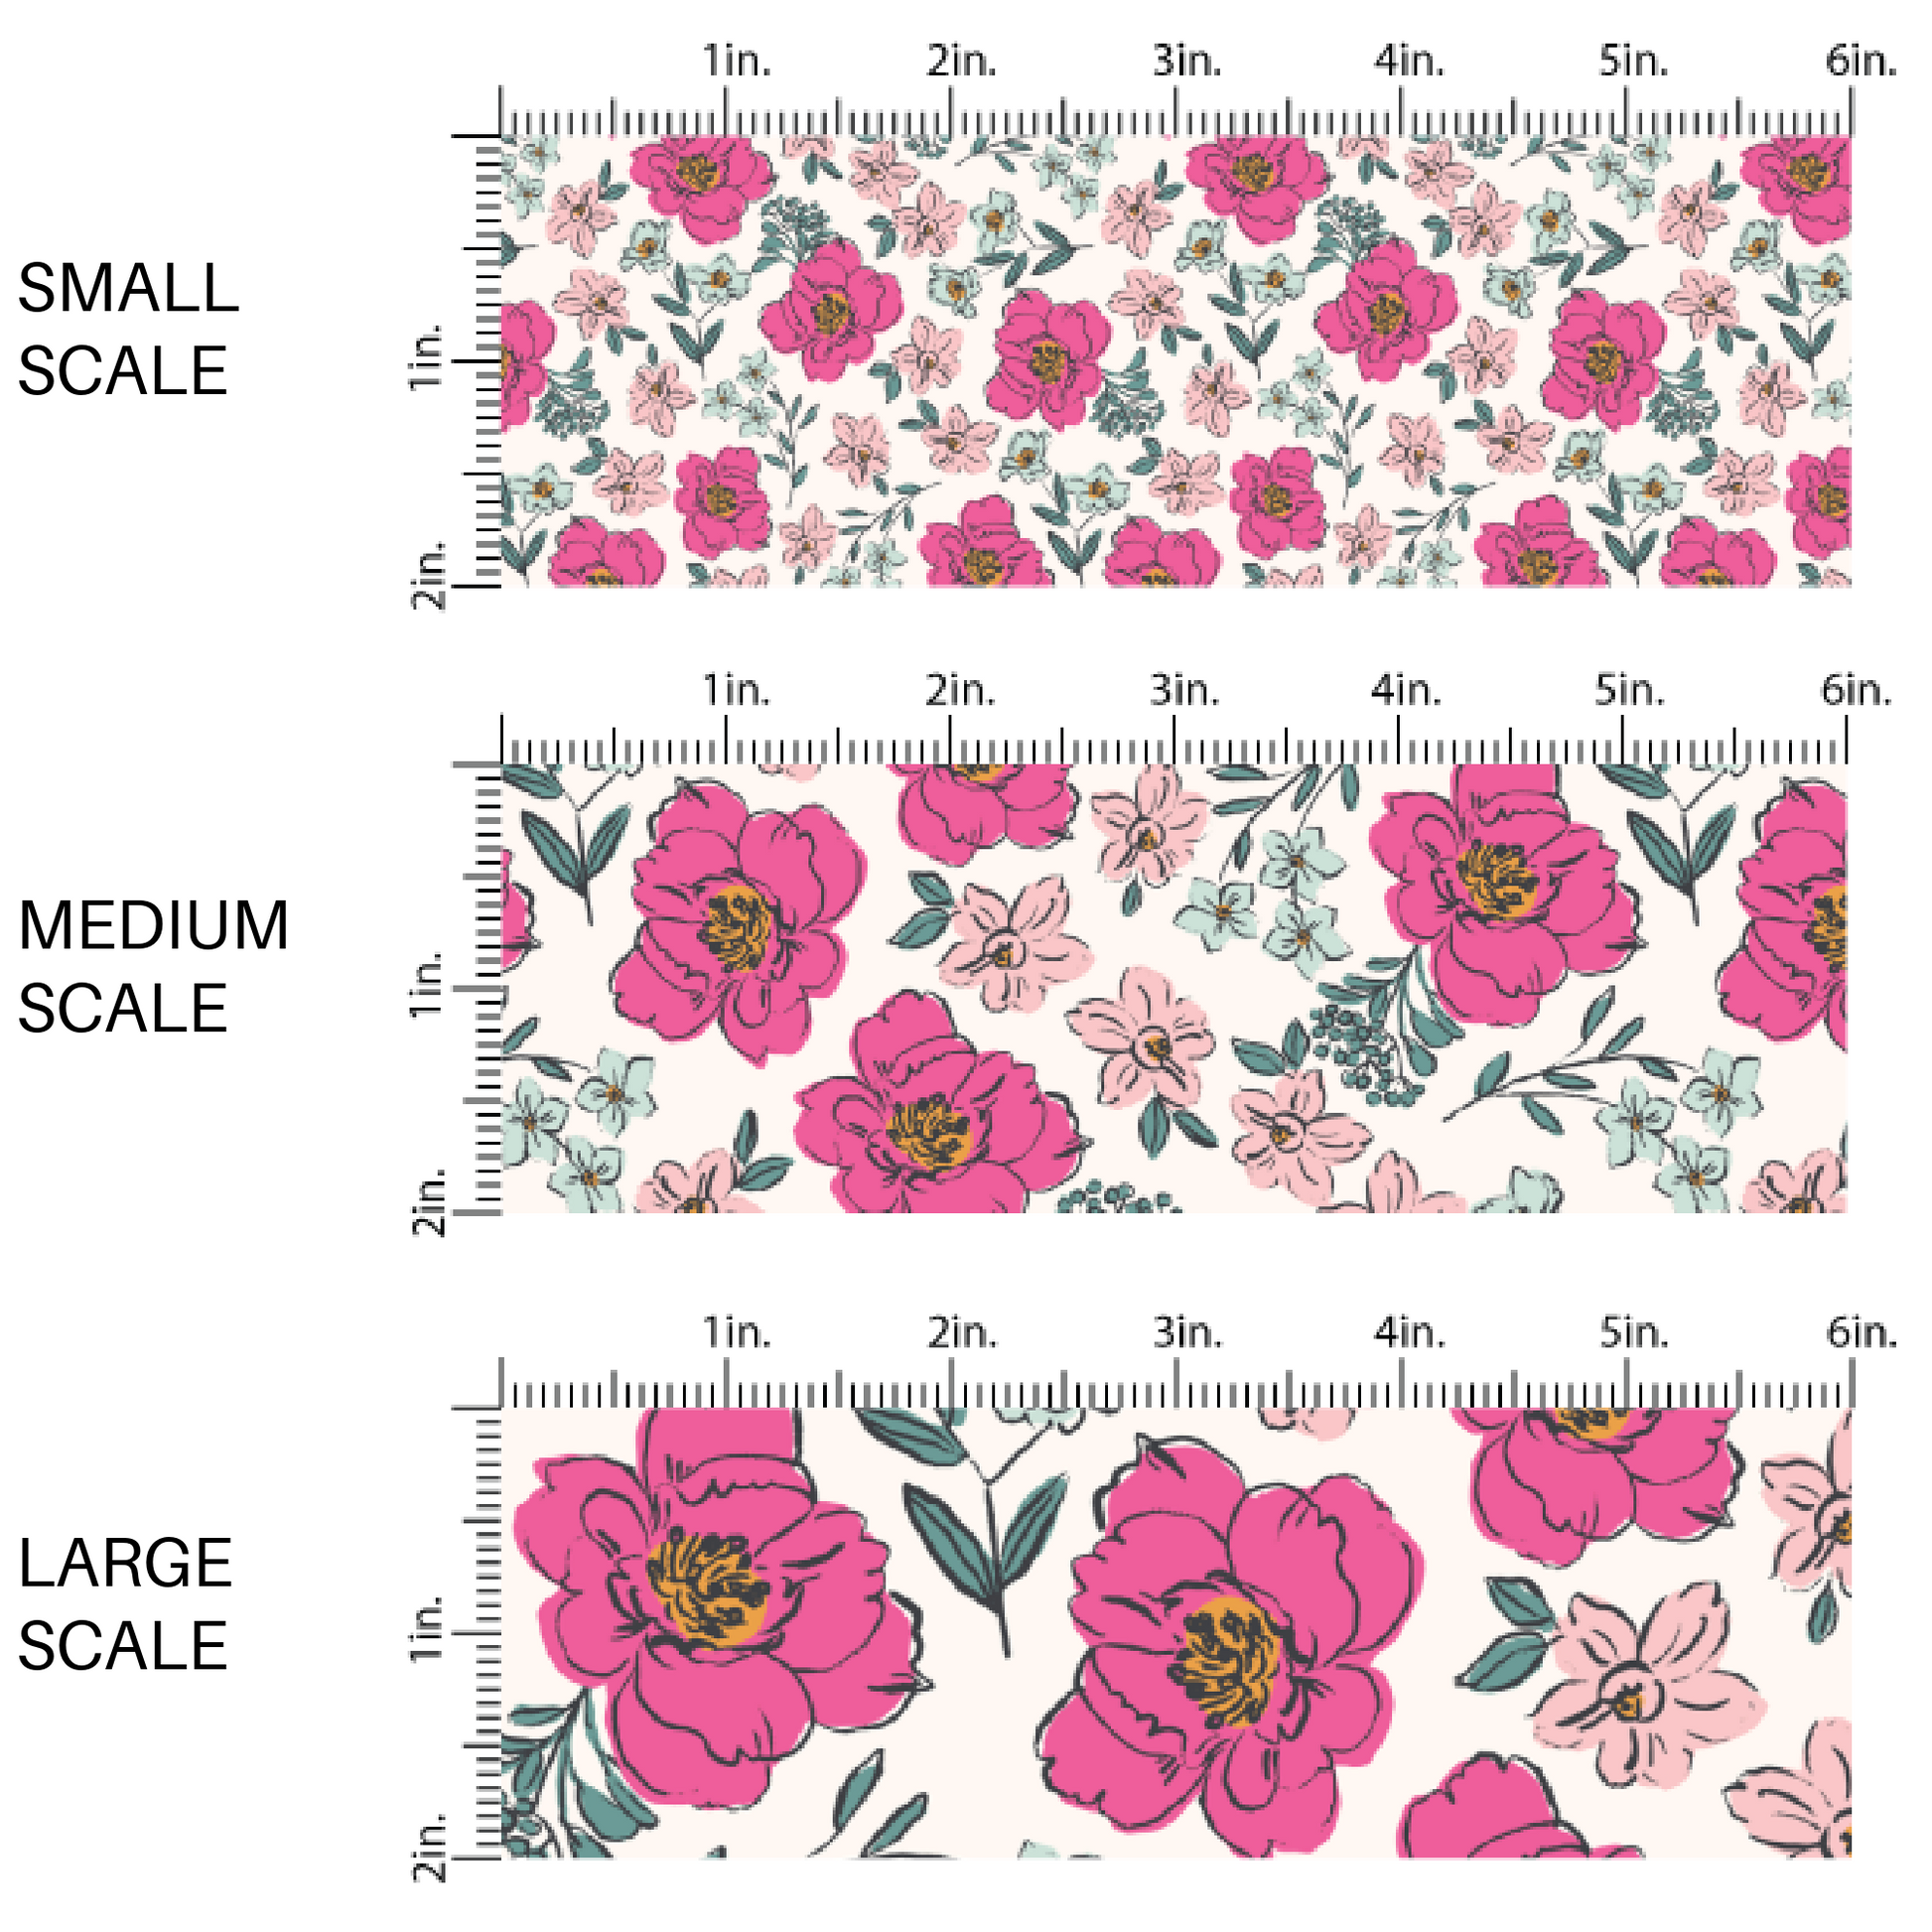 Pink Florals on Cream Fabric by the Yard scaled image guide.